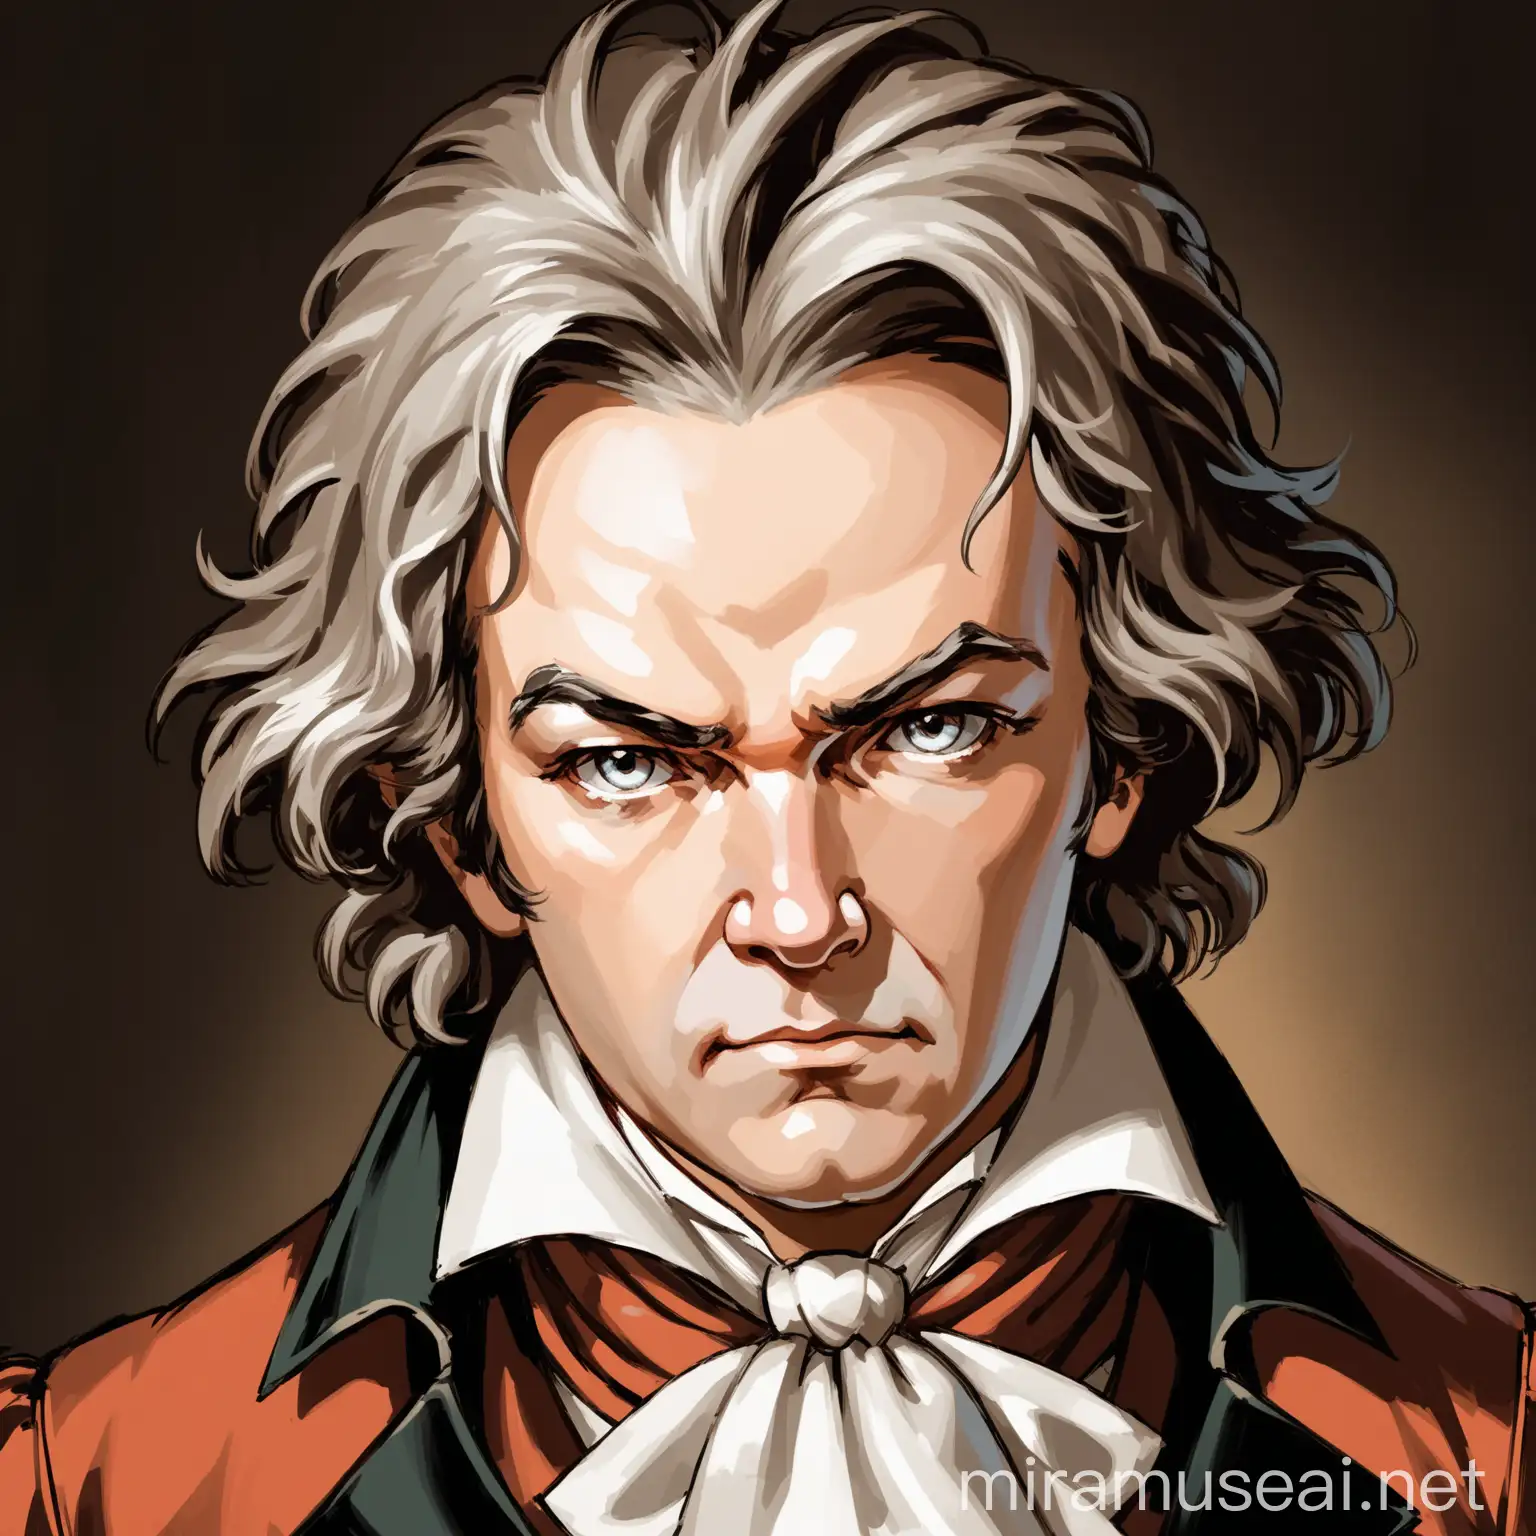 Ludwig van Beethoven Portrait Captivating Frontal View